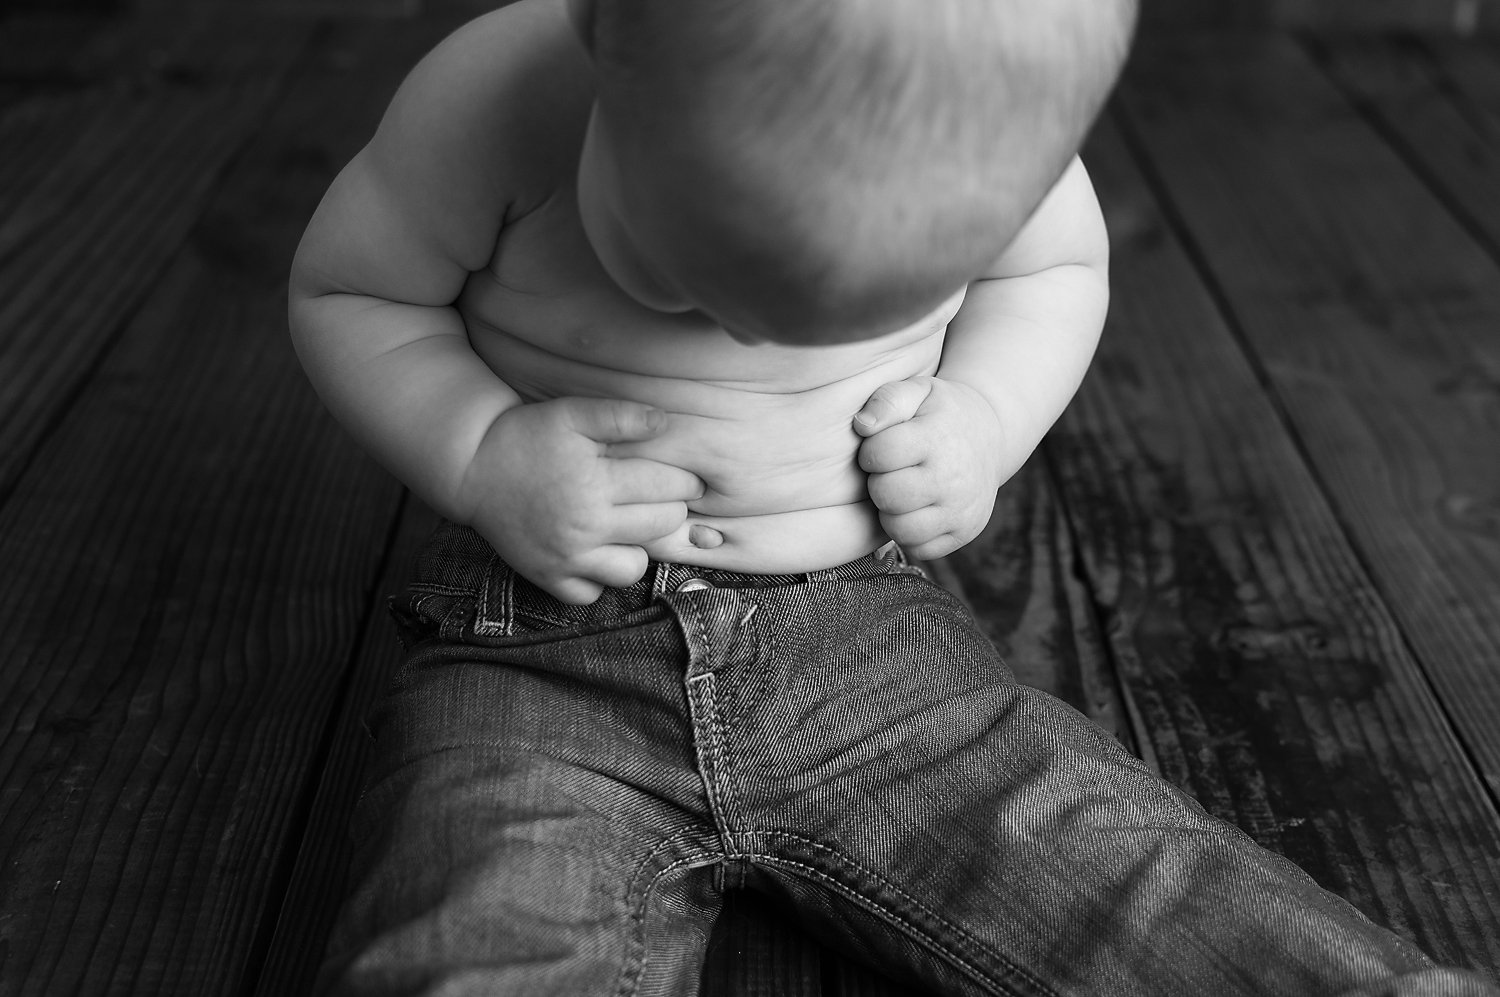 January 20 2016-Tabatha Sue Photography-Brook Park Ohio-Simple Set Up-1st Birthday Boy-Baby Portraits-Northeast Ohio-Wood Backdrop-Baby Jeans-Baby Rolls-Details of Baby-Black and White Photography.jpg